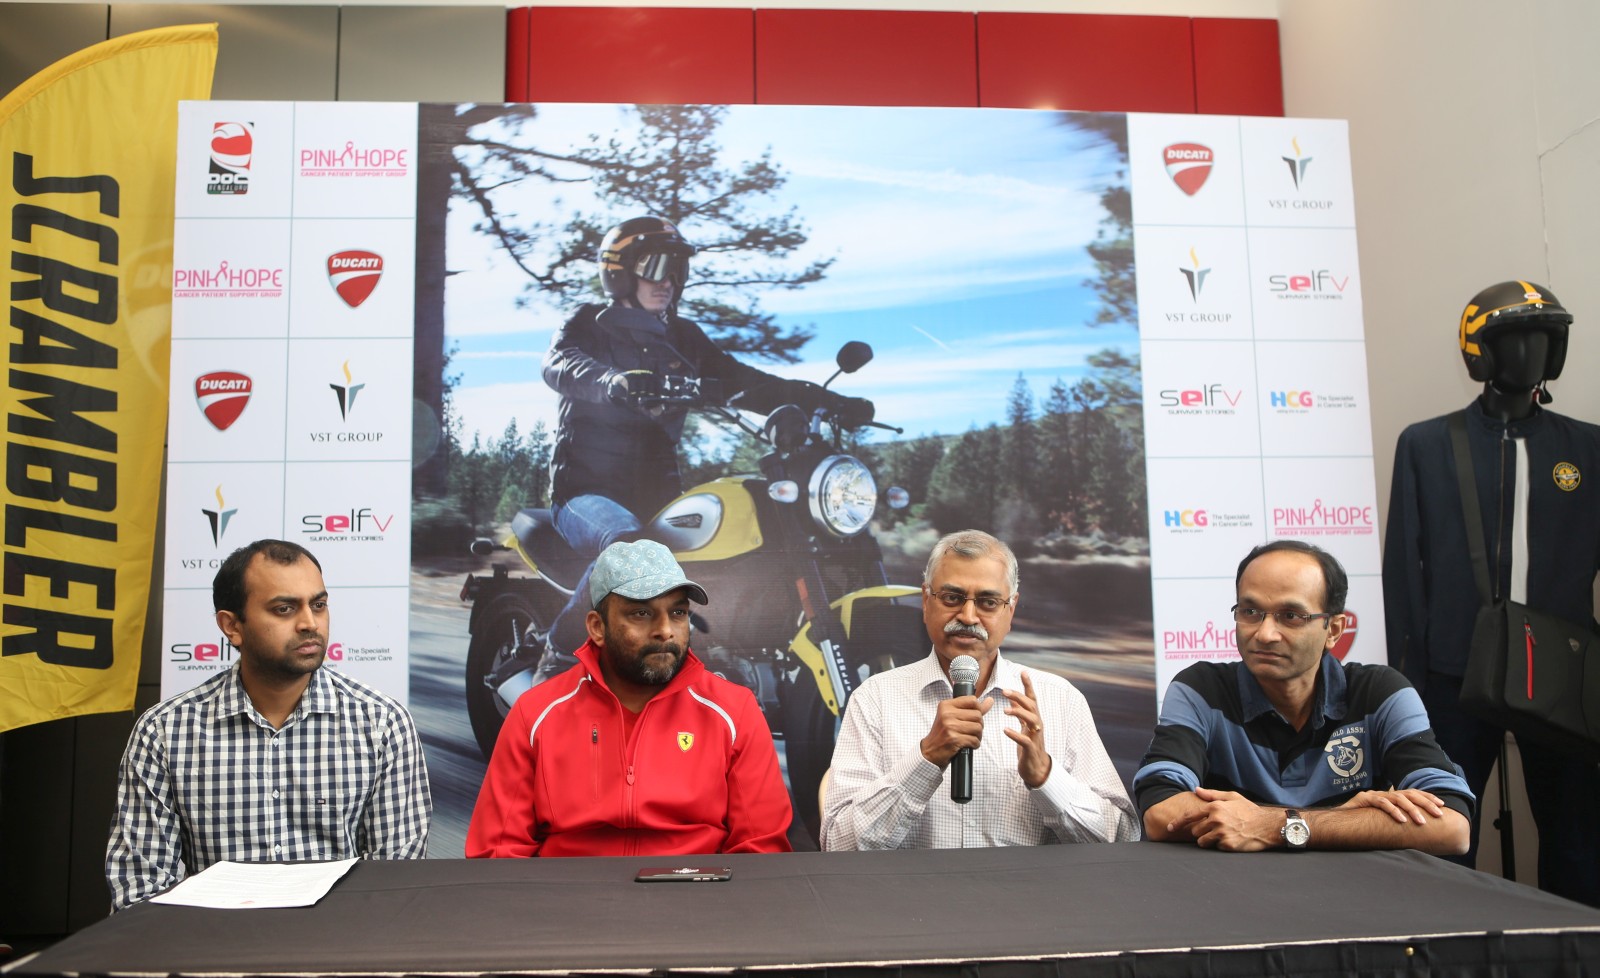 ducati-owners-club-supports-awareness-on-cancer-with-selfv-survivor-stories-1